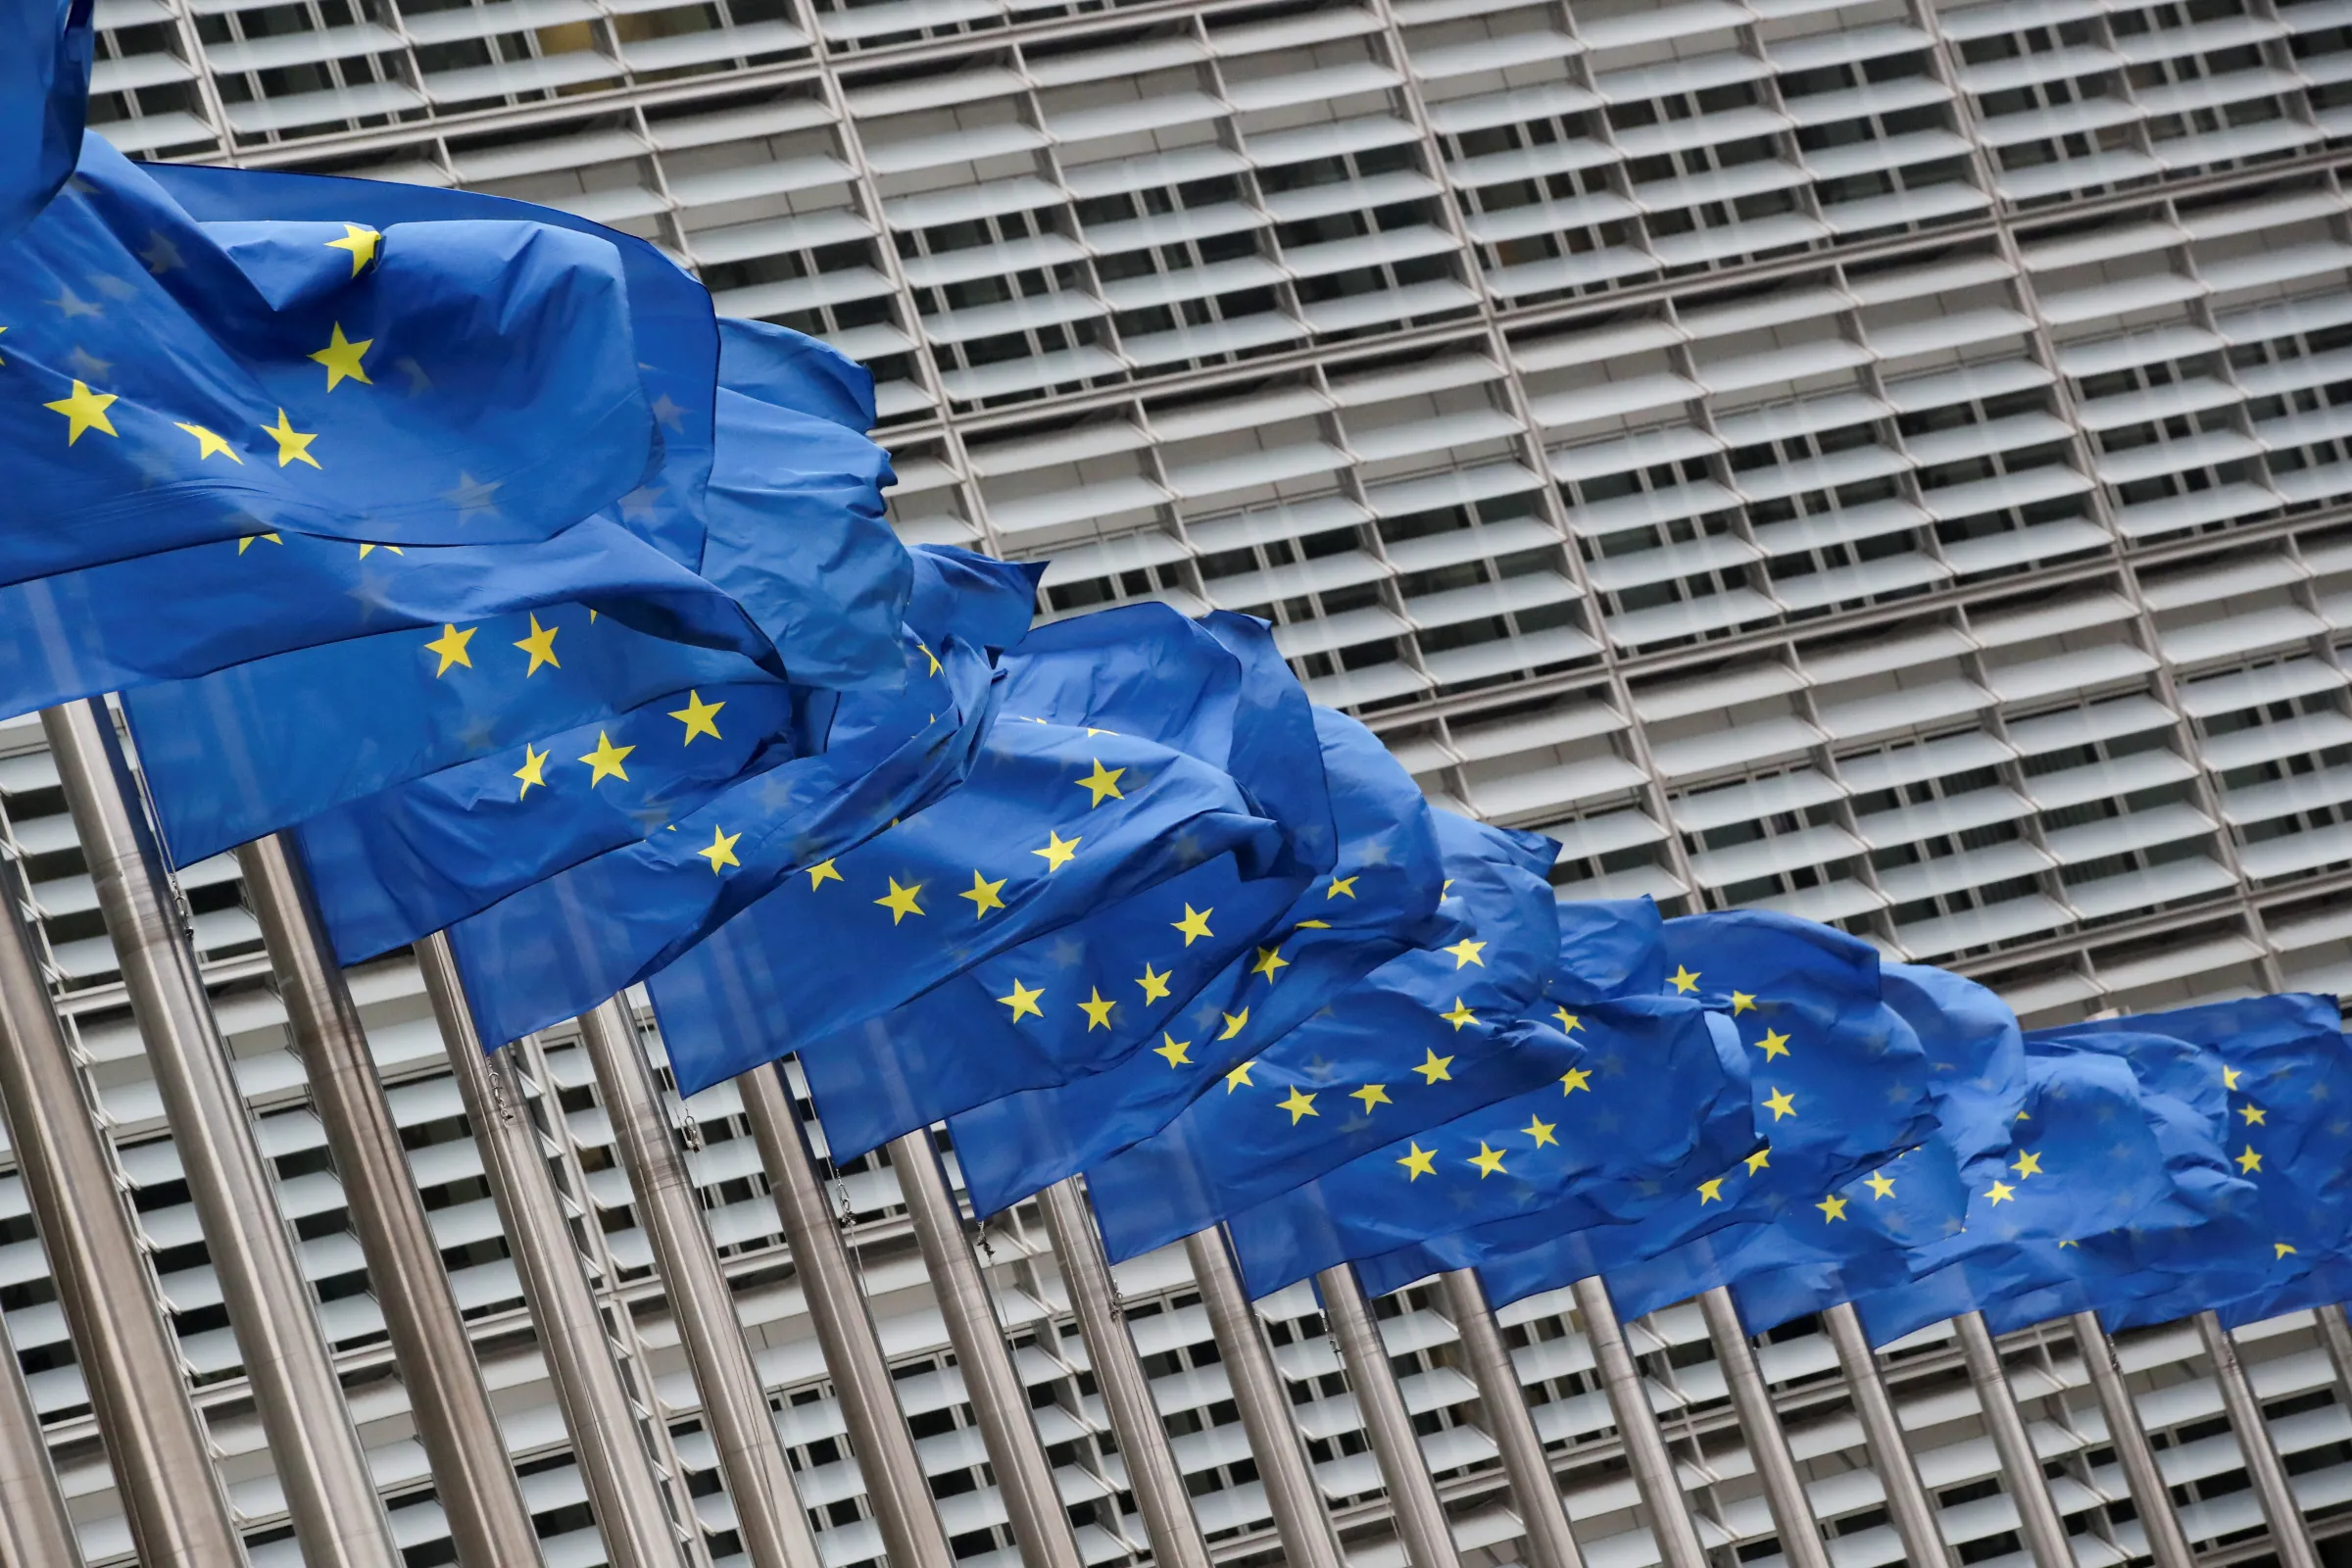 European Union flags flutter outside the EU Commission headquarters in Brussels, Belgium, July 14, 2021. REUTERS/Yves Herman